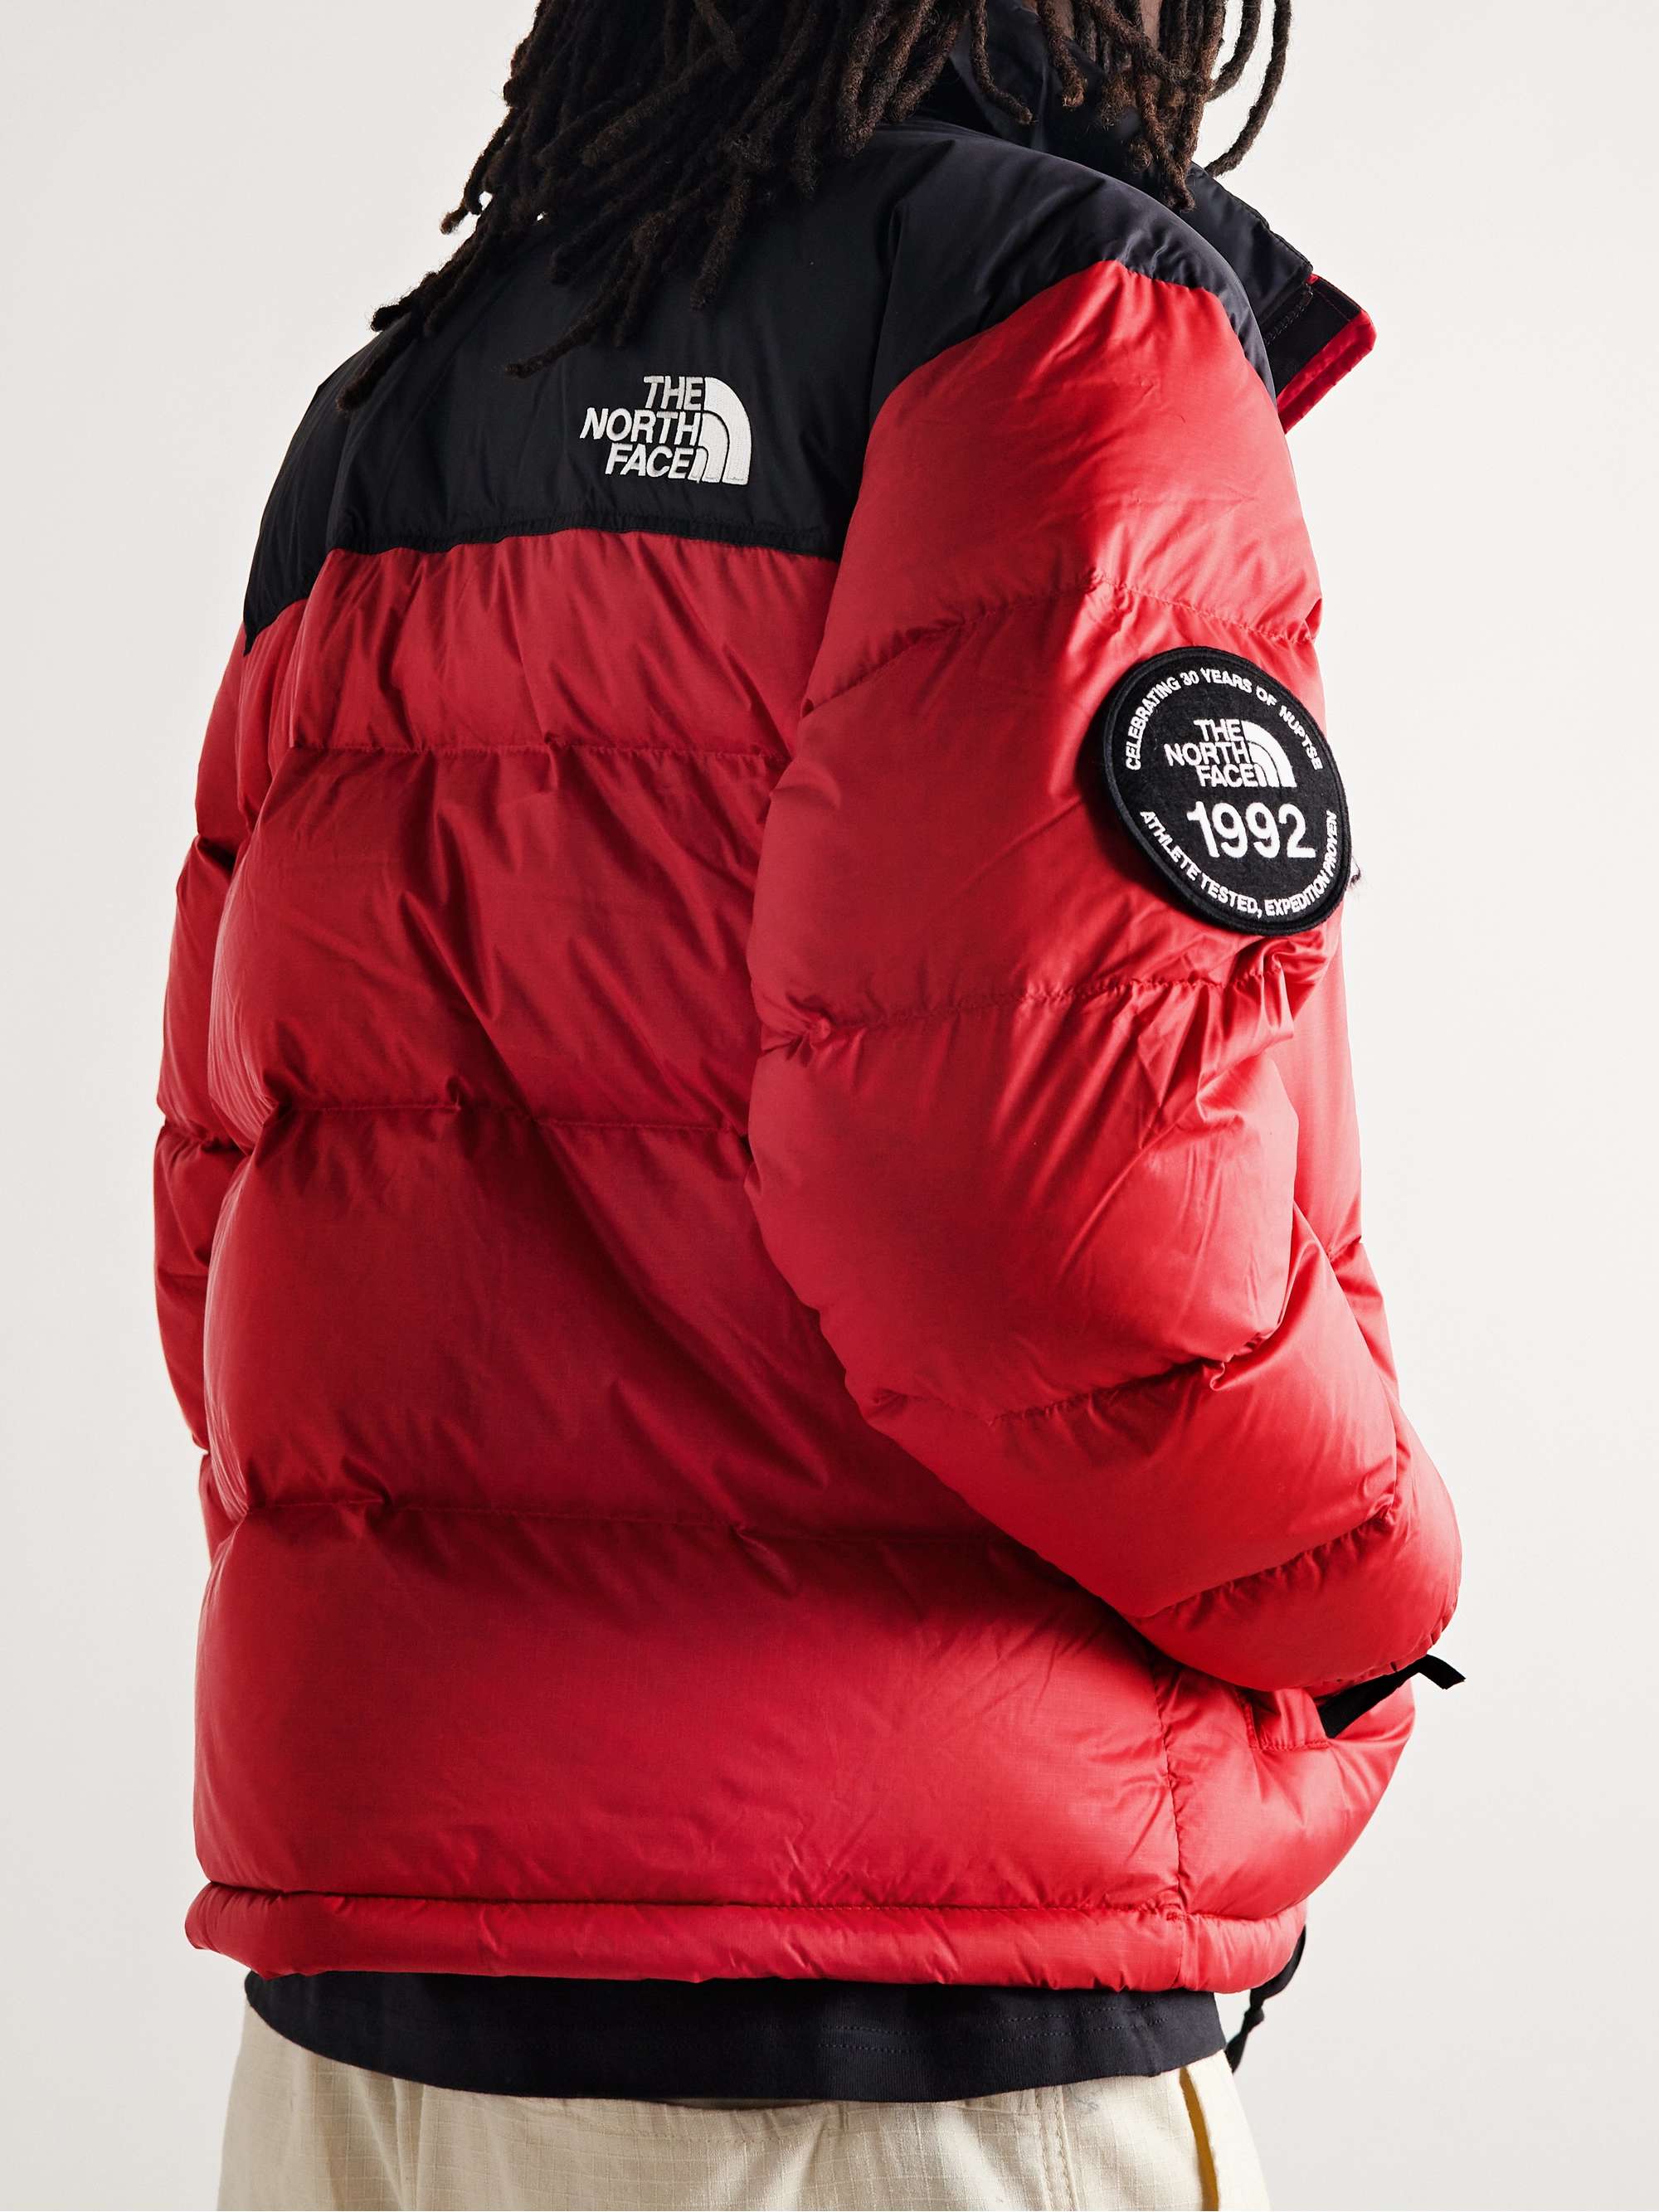 THE NORTH FACE 92 Retro Anniversary Nuptse Shell-Trimmed Ripstop Down Jacket  | MR PORTER